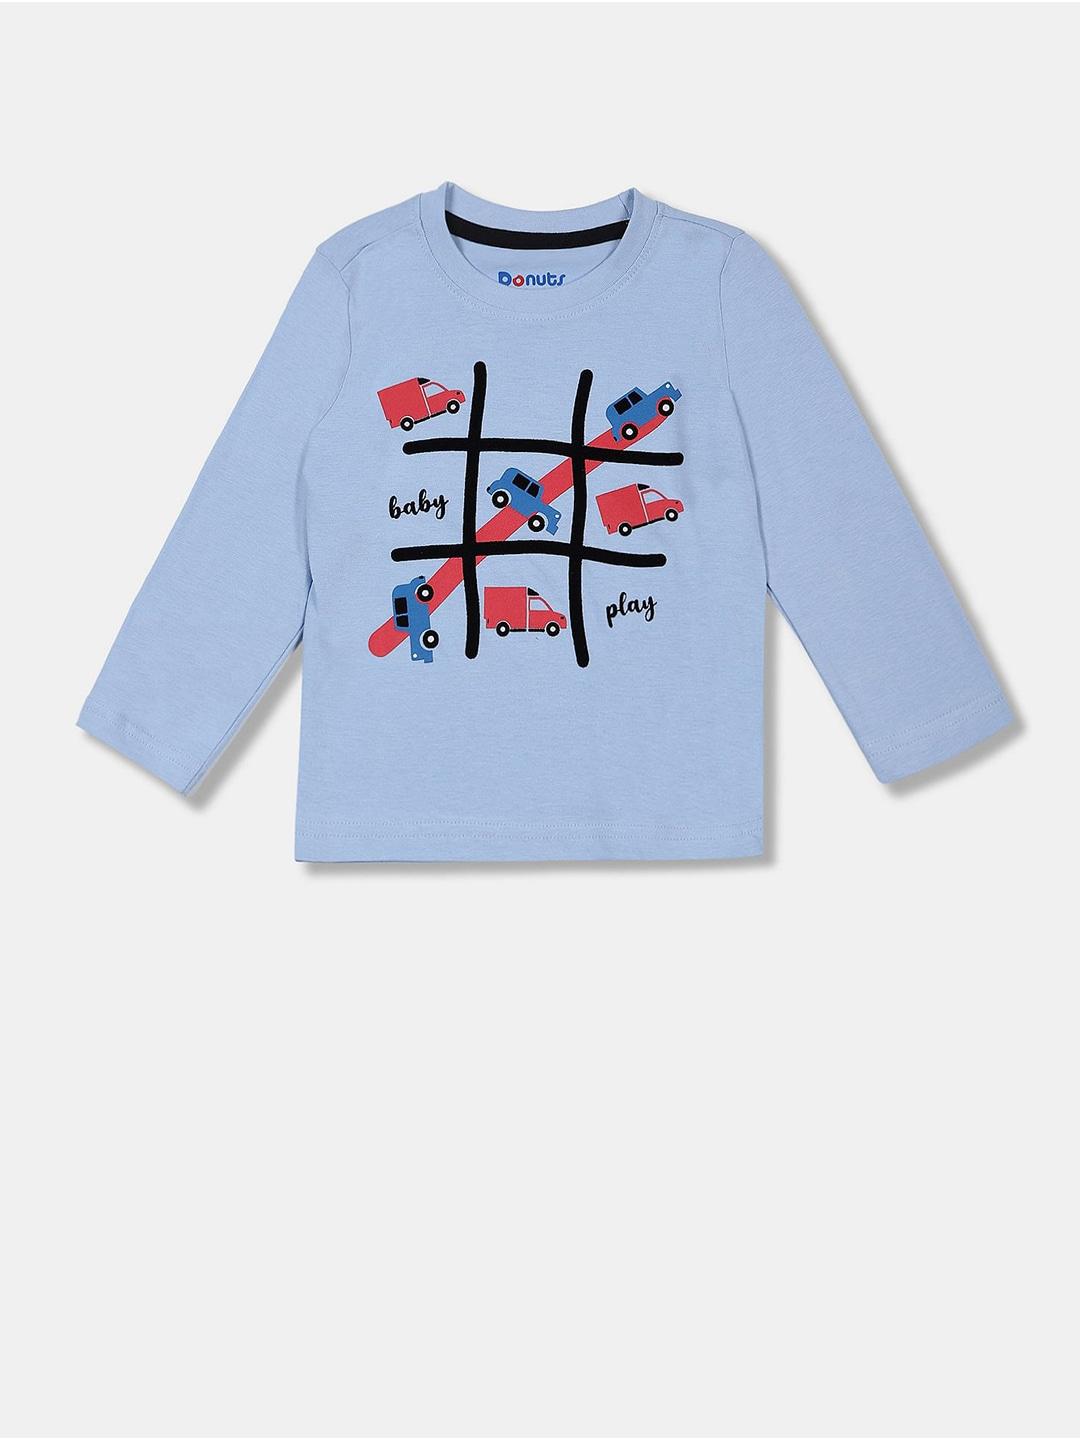 donuts-boys-blue-graphic-printed-long-sleeve-cotton-t-shirt